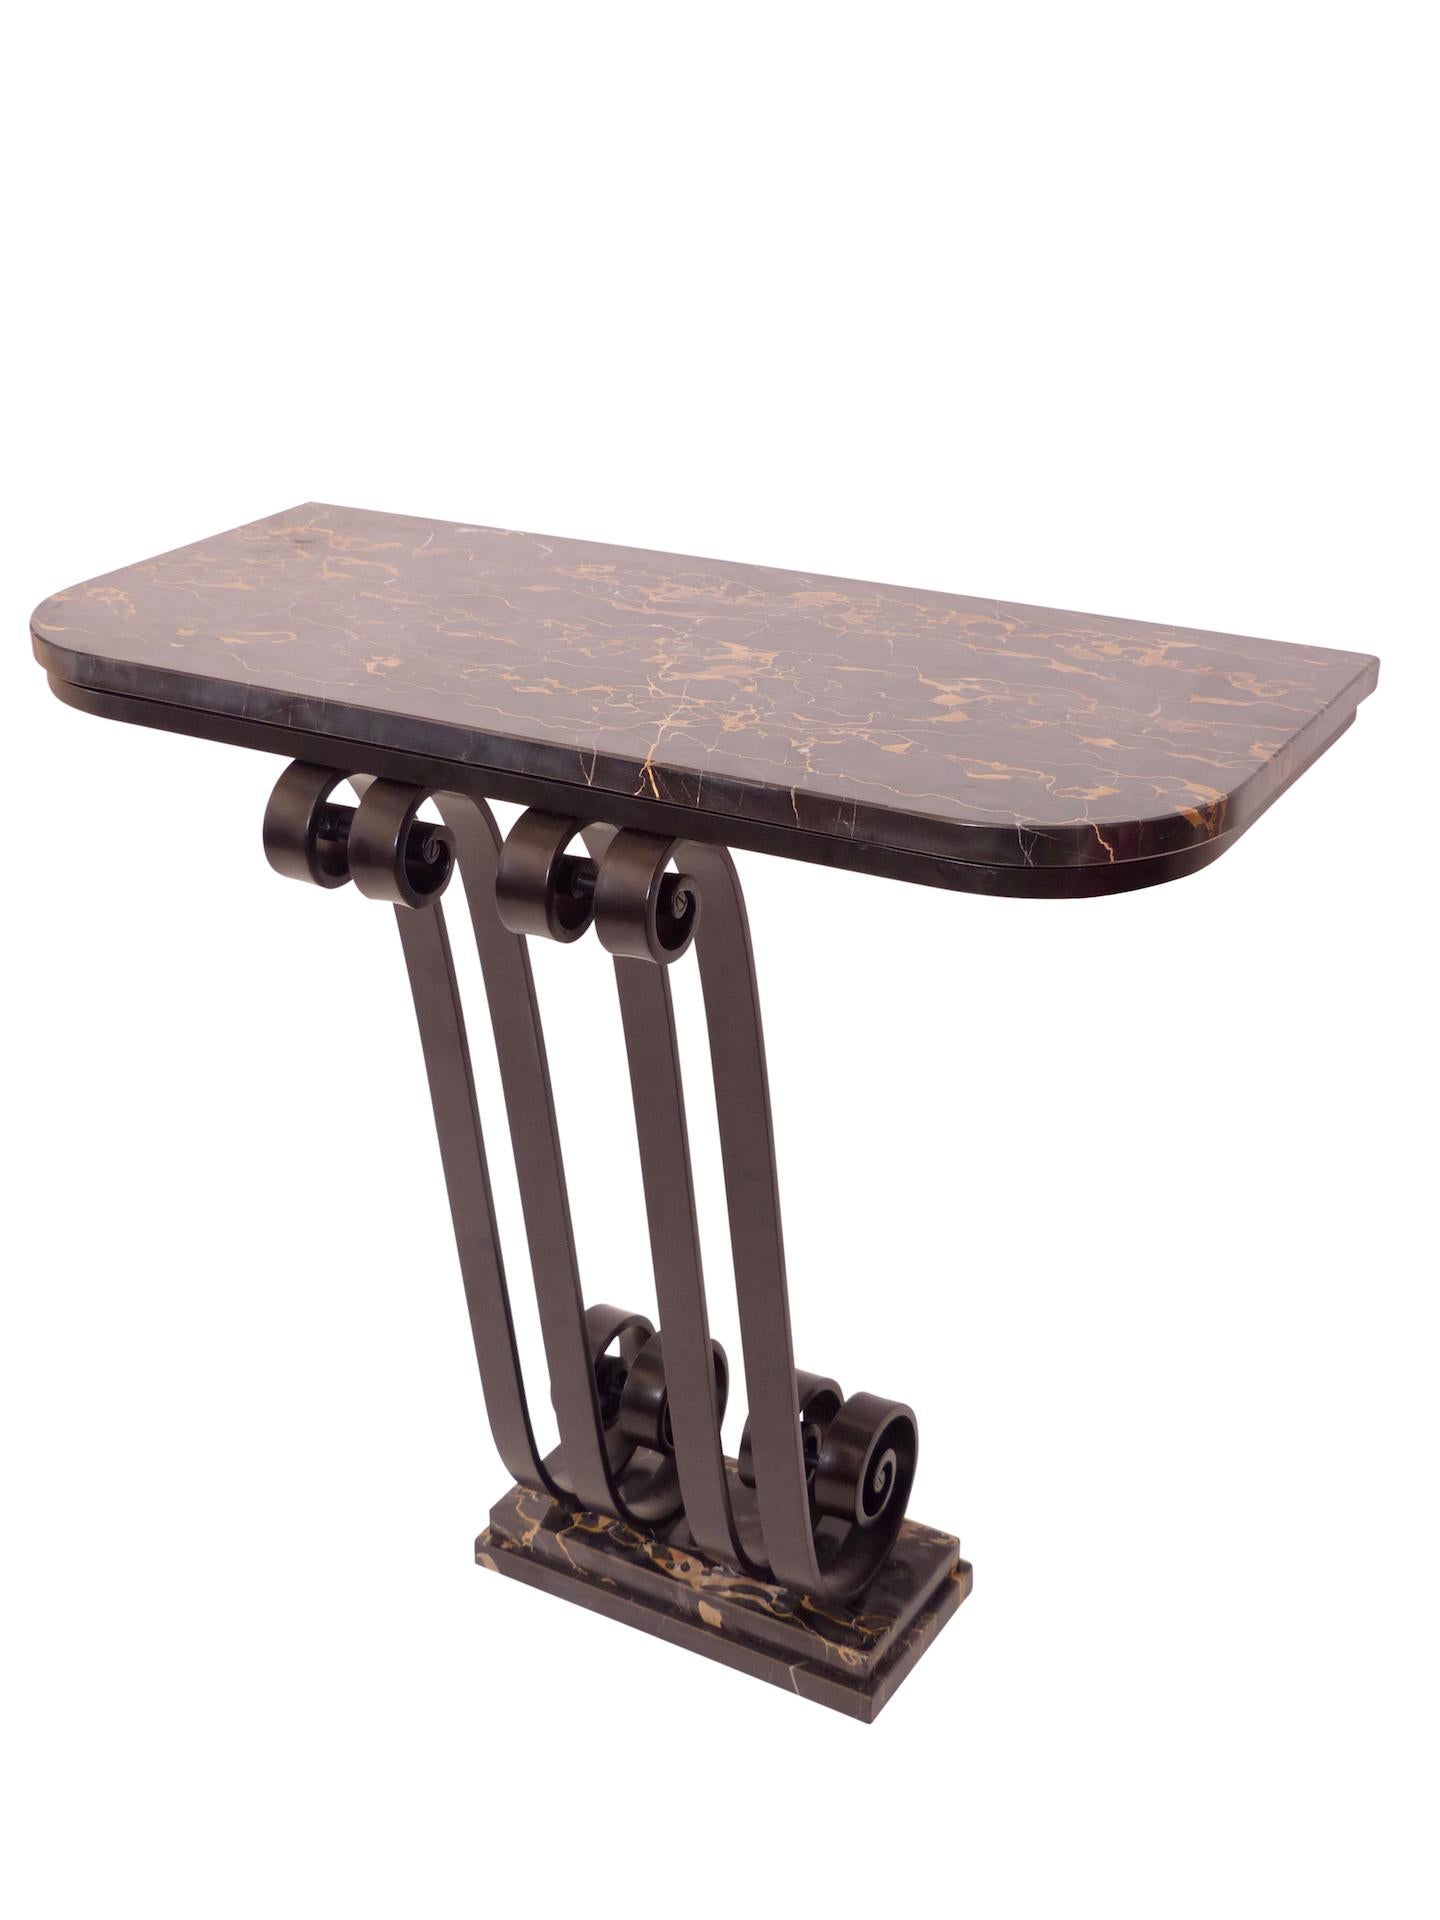 Art Deco console table 
Original Art Deco, France 1920s 

Portor marble tabletop 
Foot in wrought iron, black lacquered 
Porto marble on the foot, too 

Very heavy an good quality.